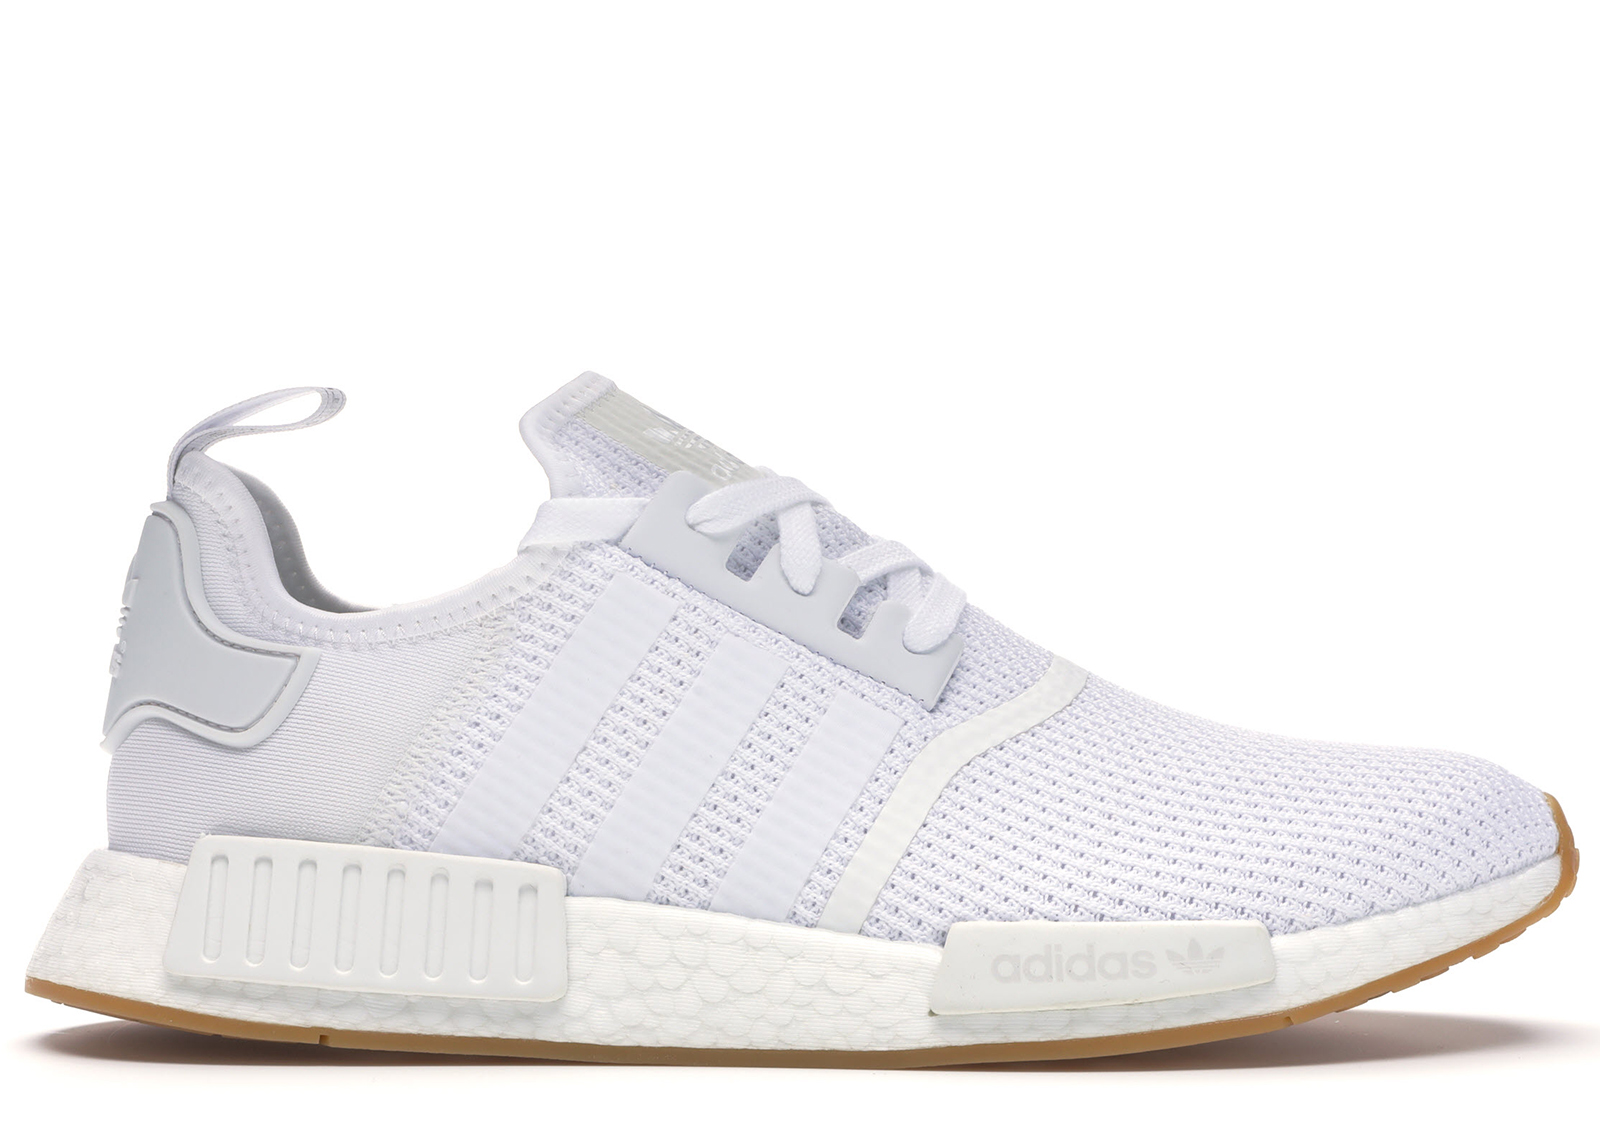 all white nmds r1